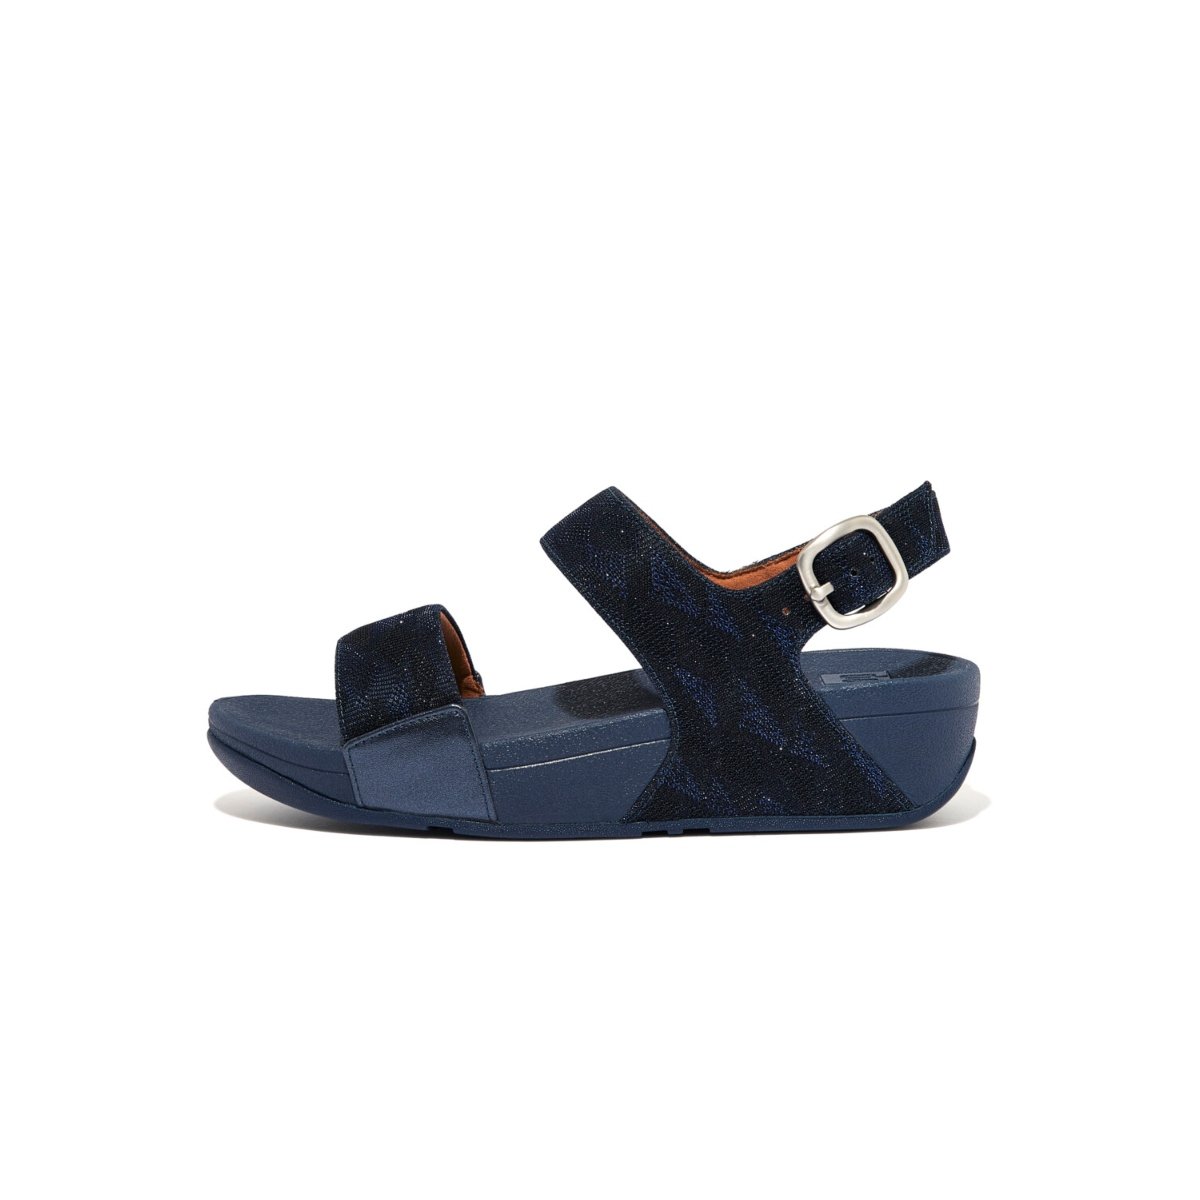 FitFlop LULU Glitz Back-Strap Sandals Midnight Navy front view